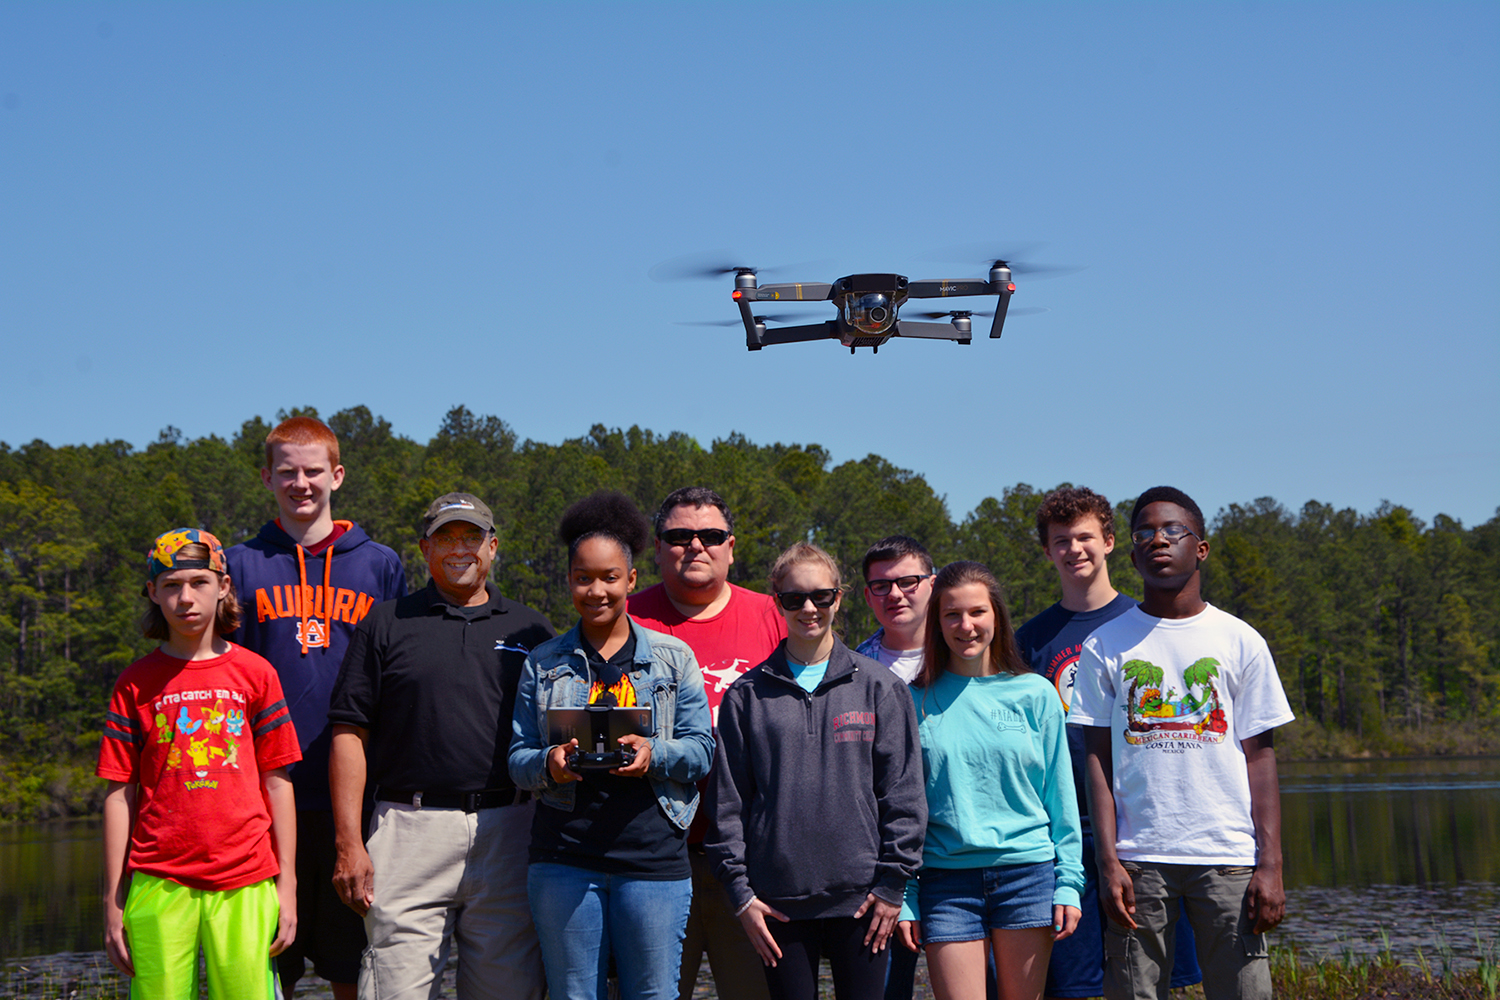 The Drone Academy students and instructors stand by the lake with a drone hovering in front of them.